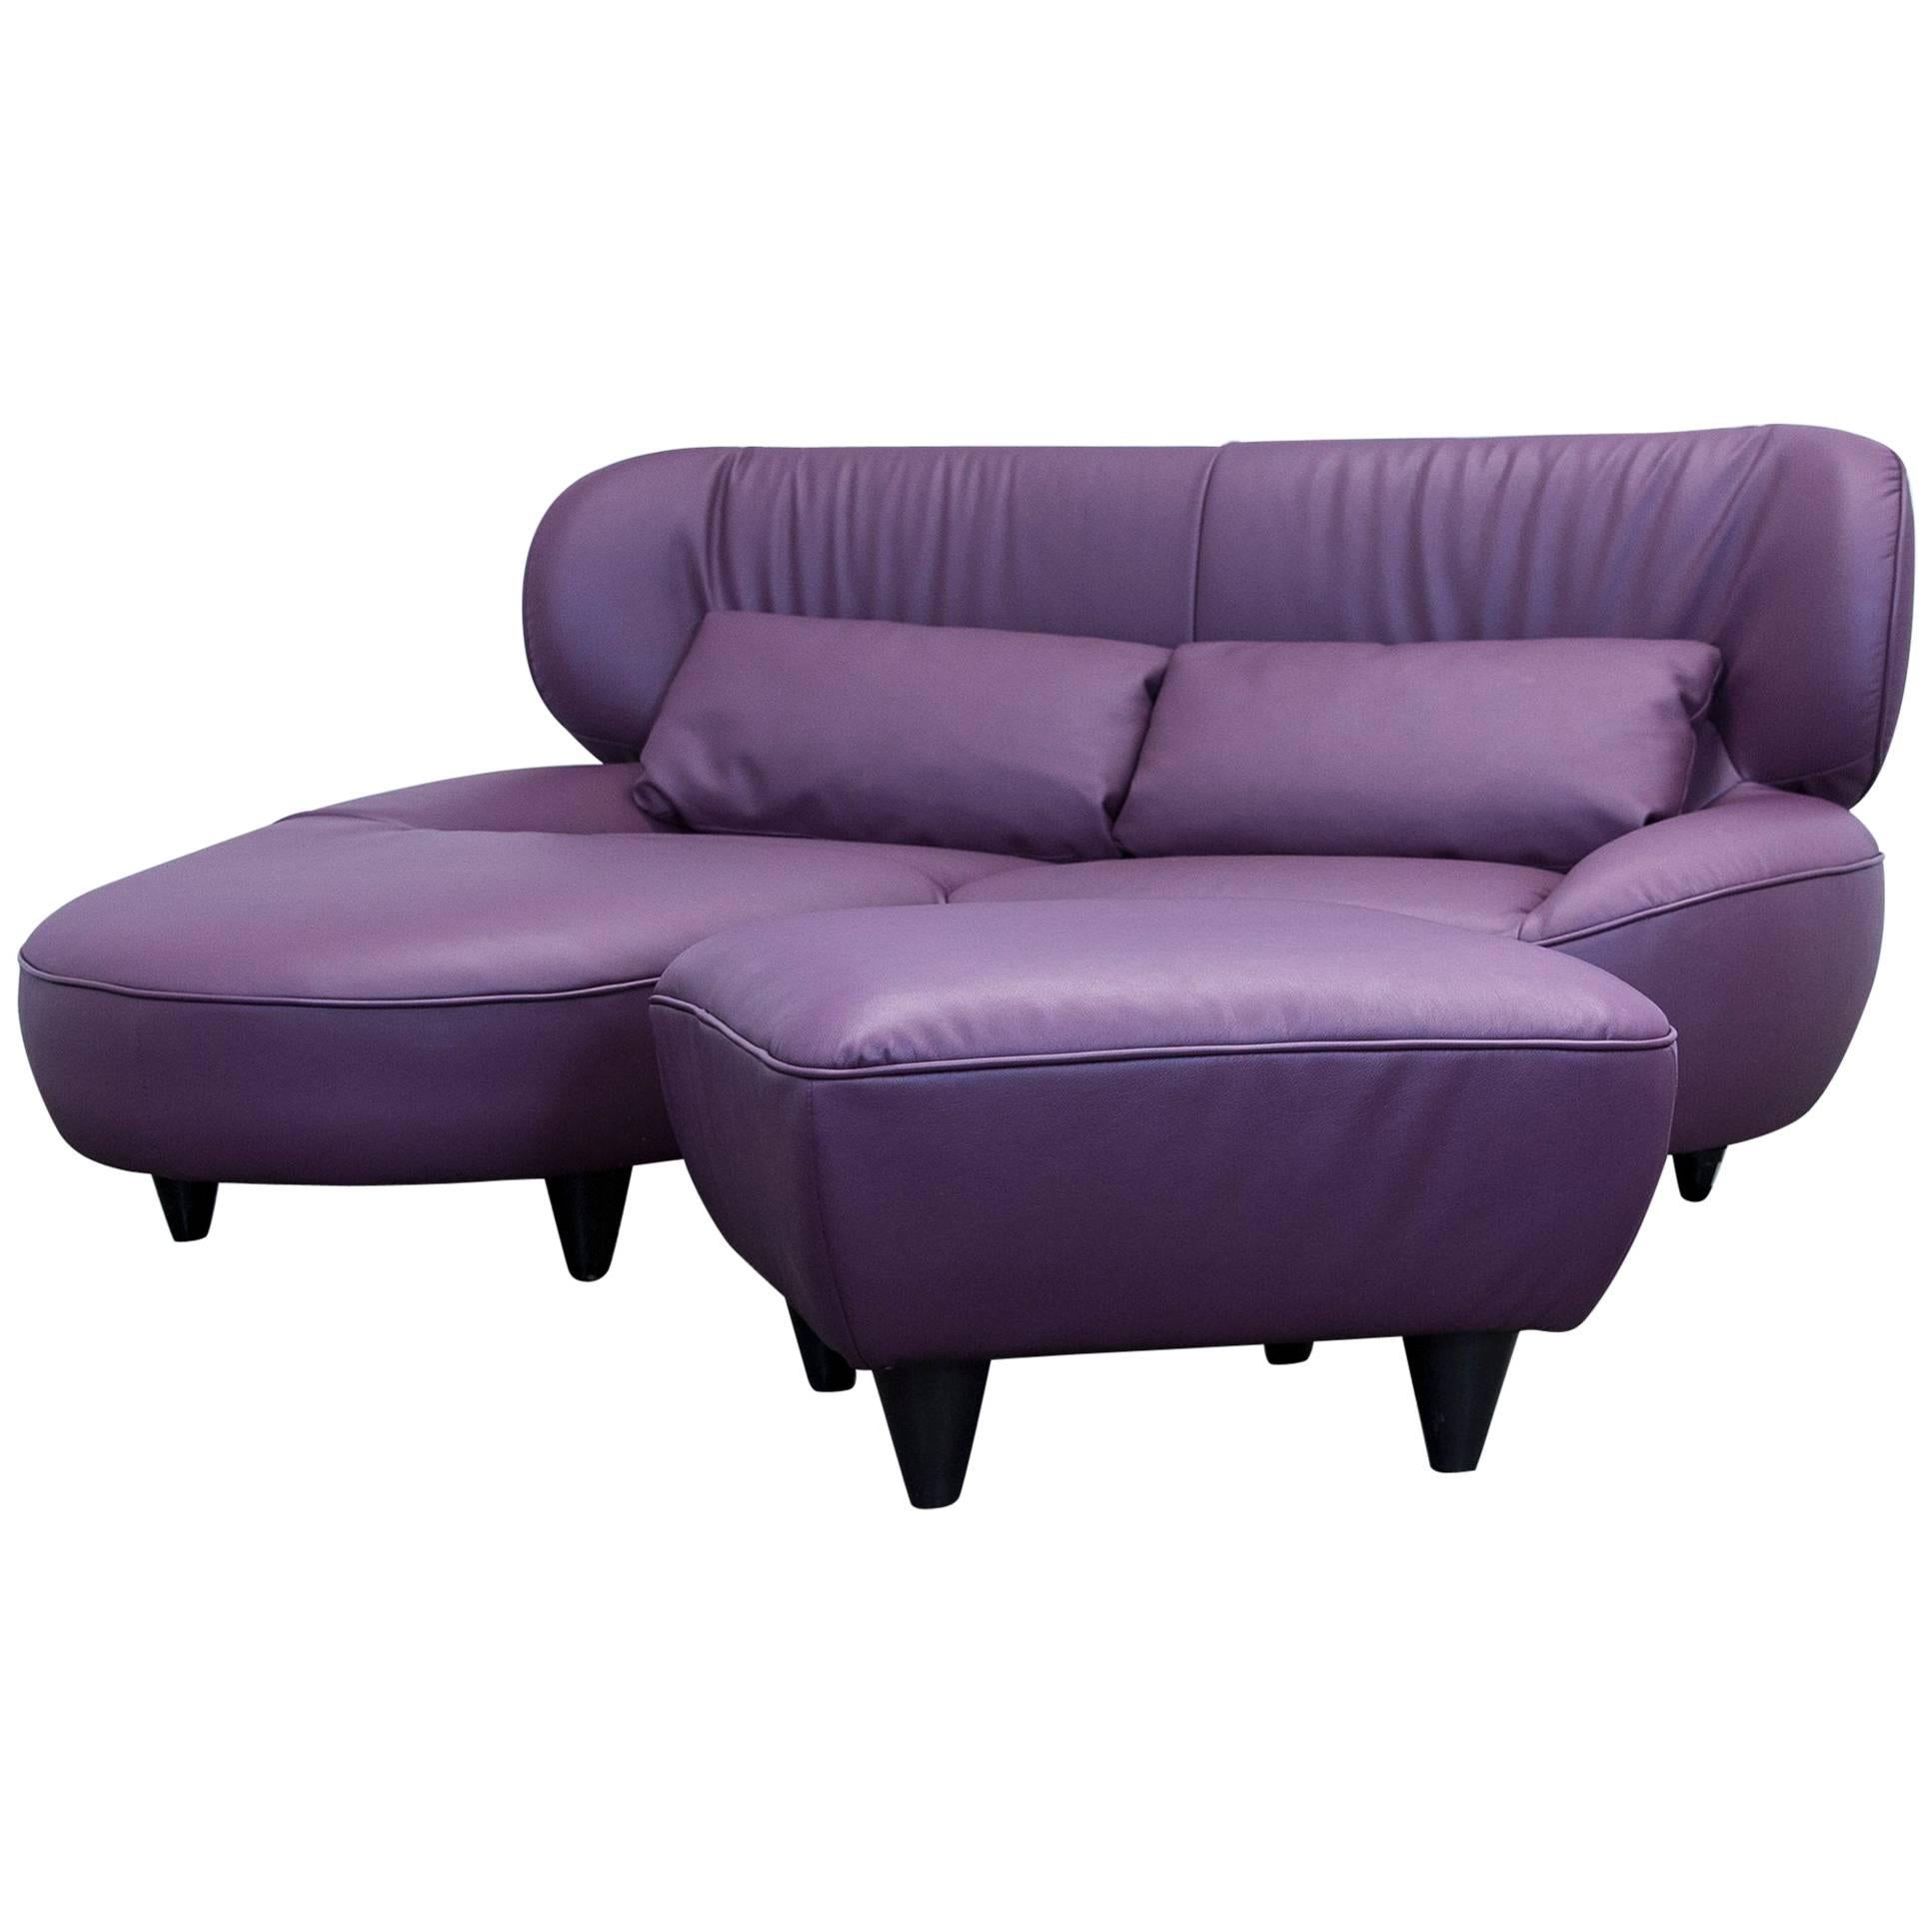 Designer Corner Sofa Set Footstool Lilac Two-Seat Couch Modern Faux Leather For Sale